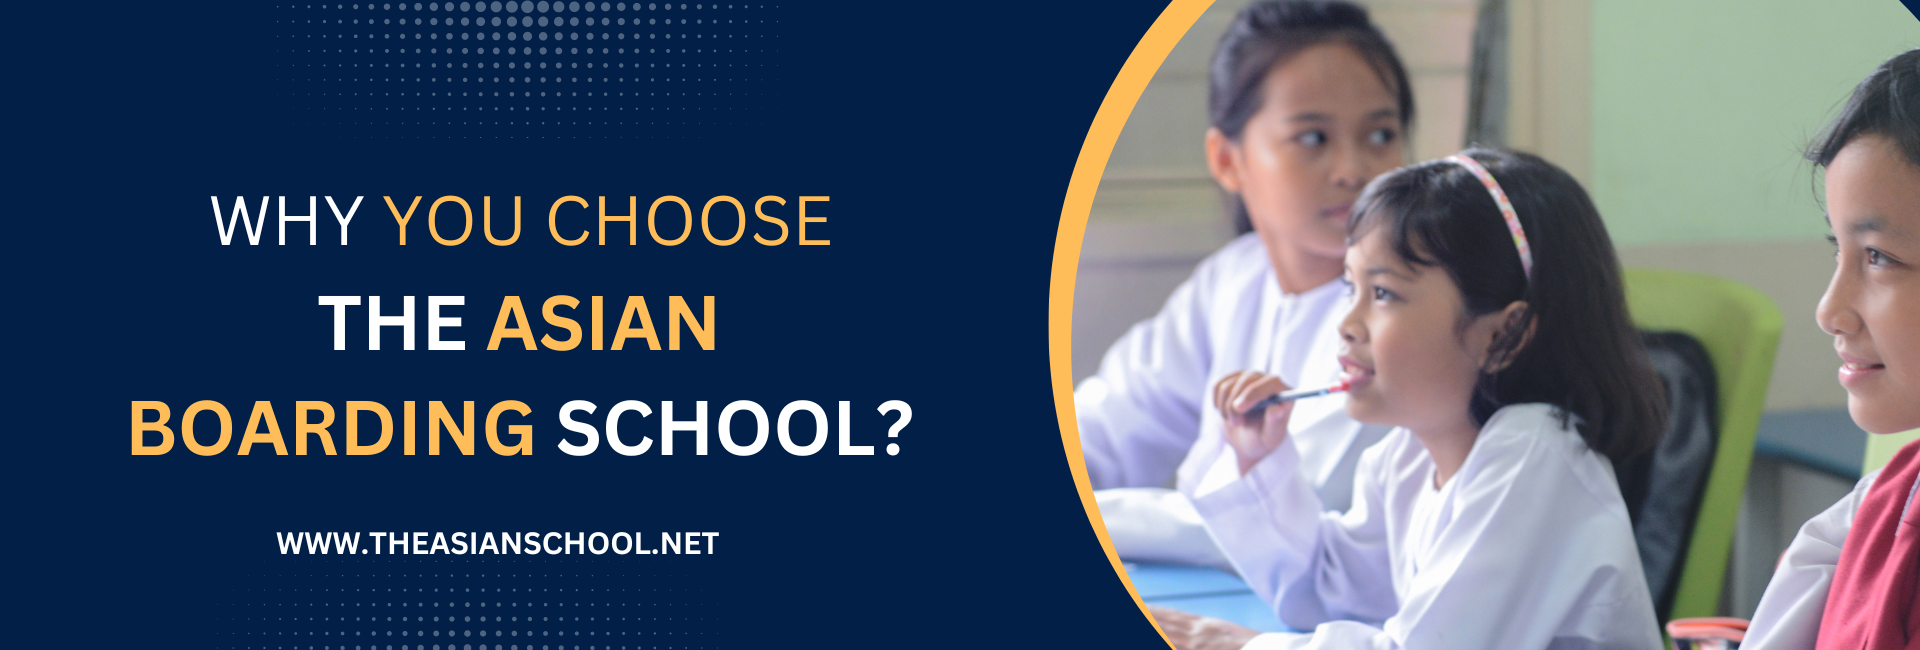 Why You Choose The Asian Boarding School?